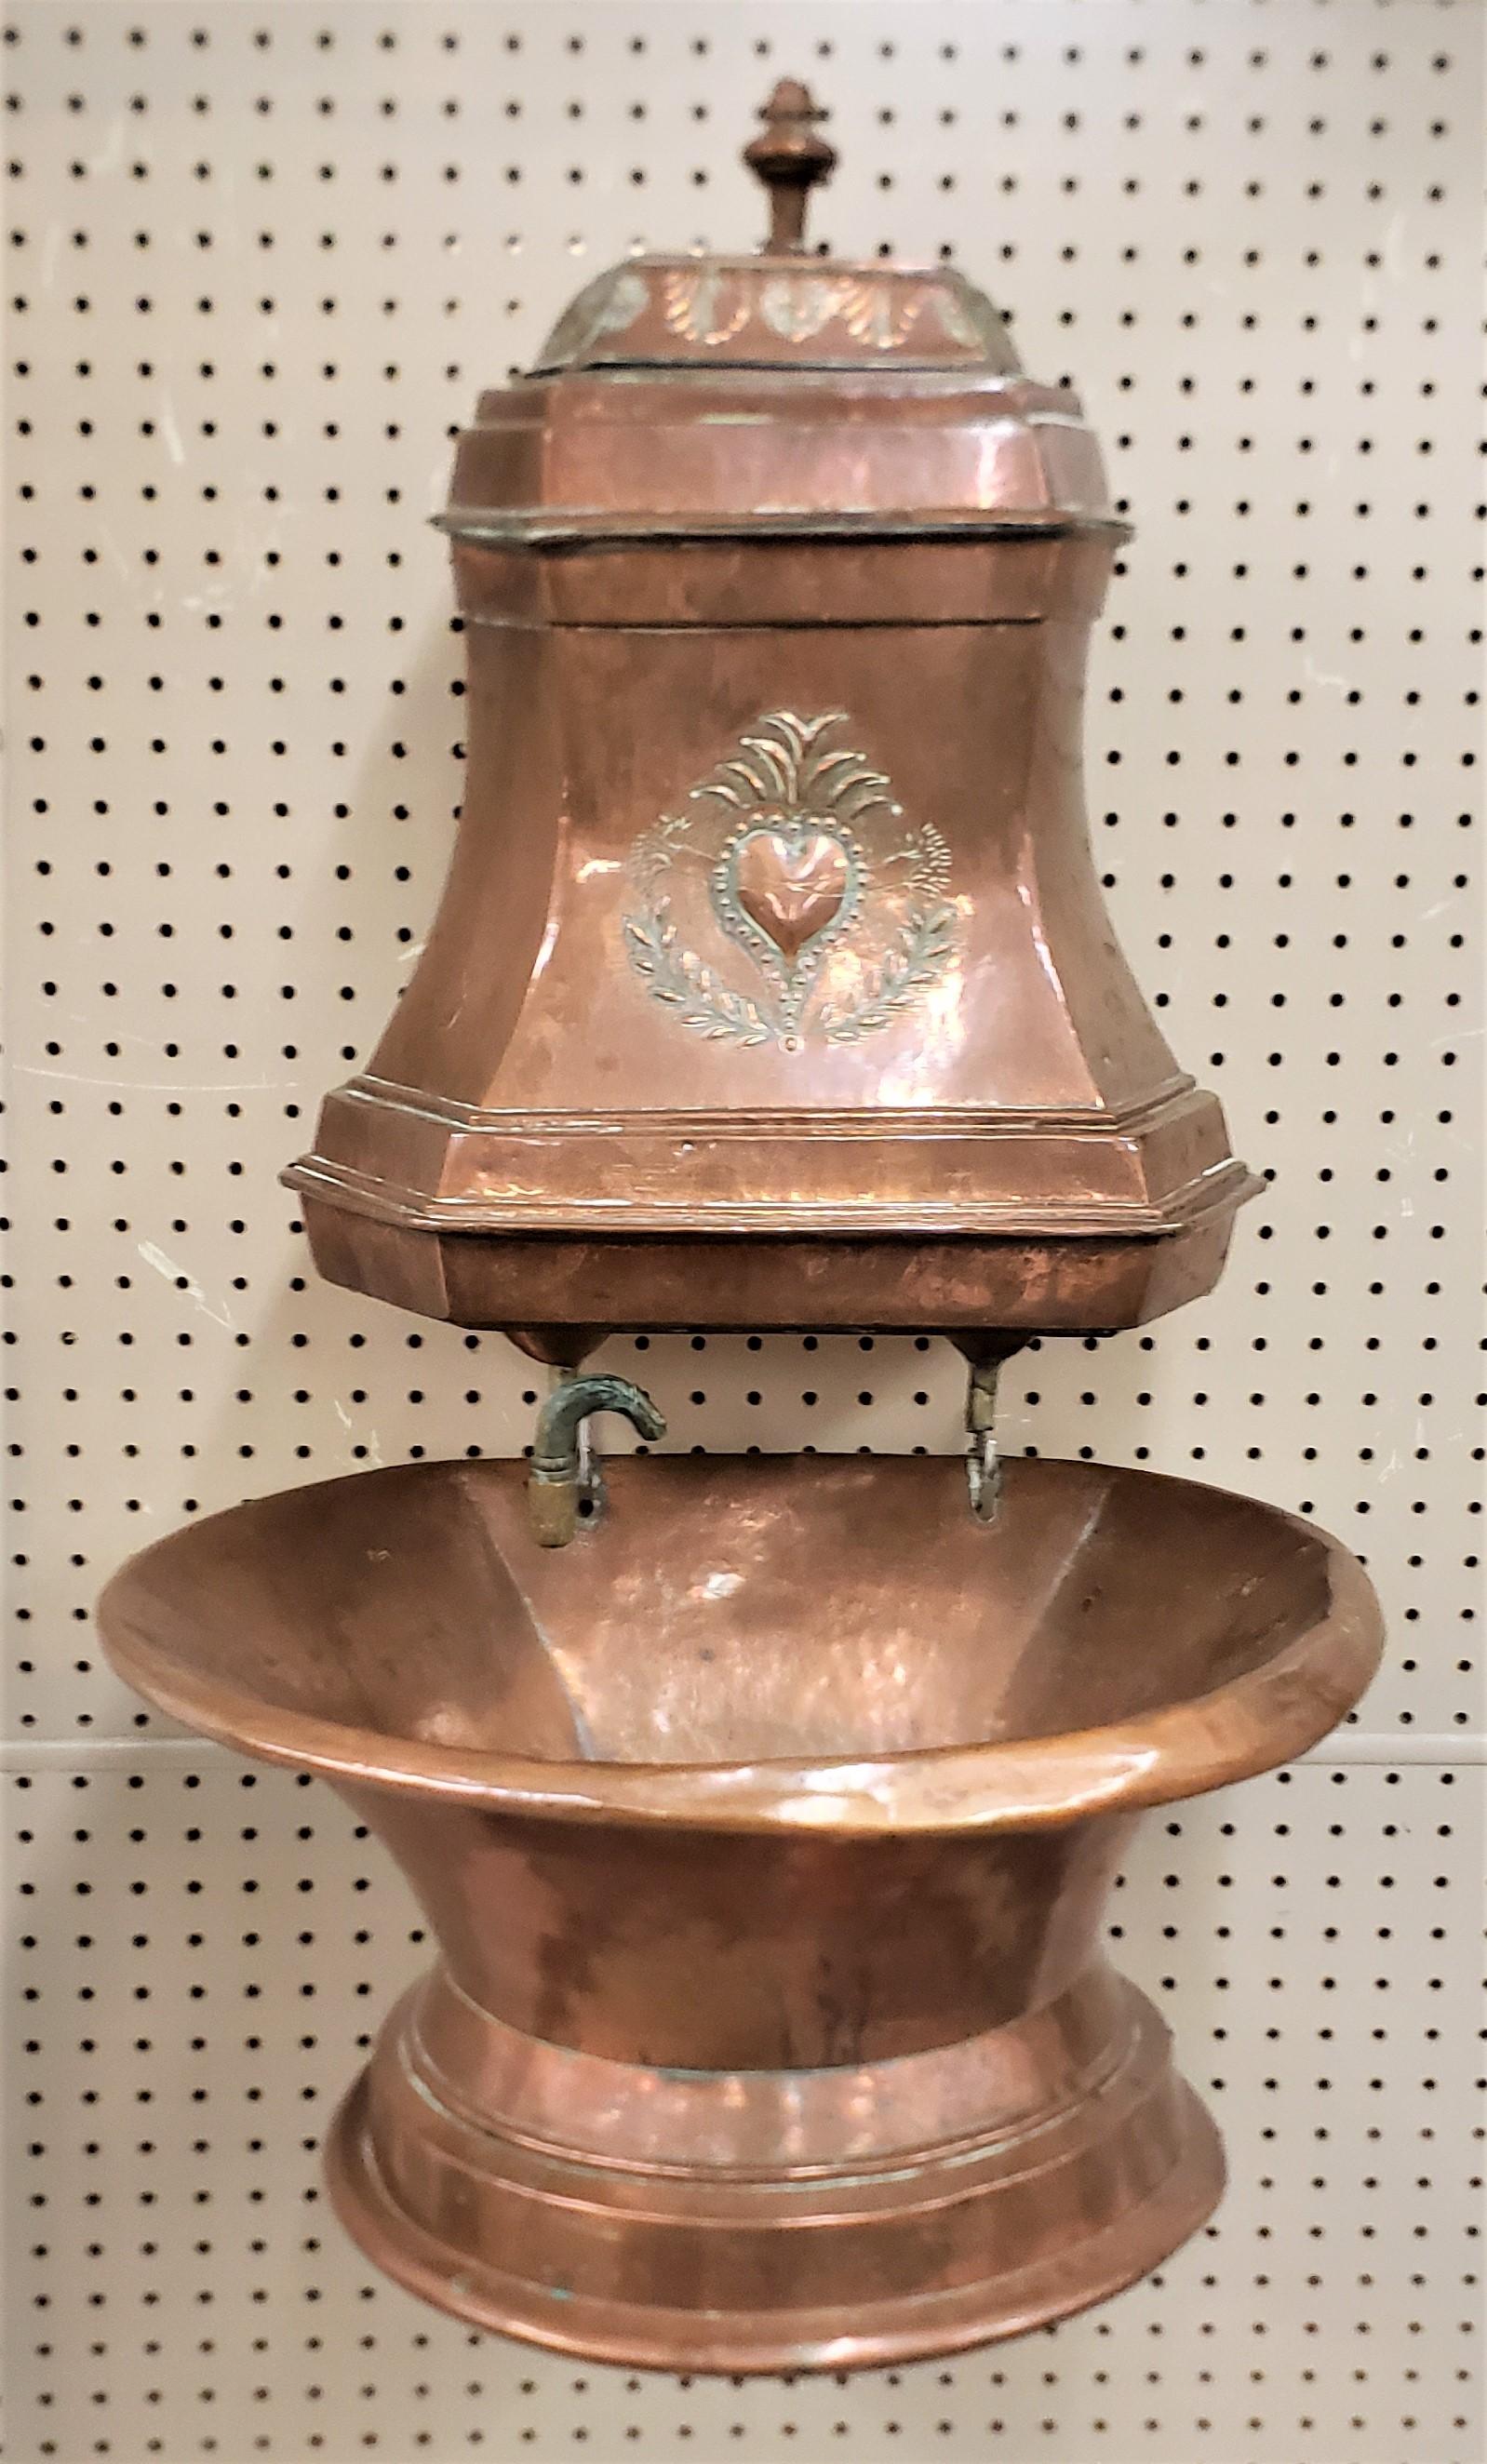 This antique copper lavabo or cistern and sink is unsigned, but presumed to originate from France and date to approximately 1890 and done in the period French Provincial style. The six sided cistern is ornately decorated with a contoured top with